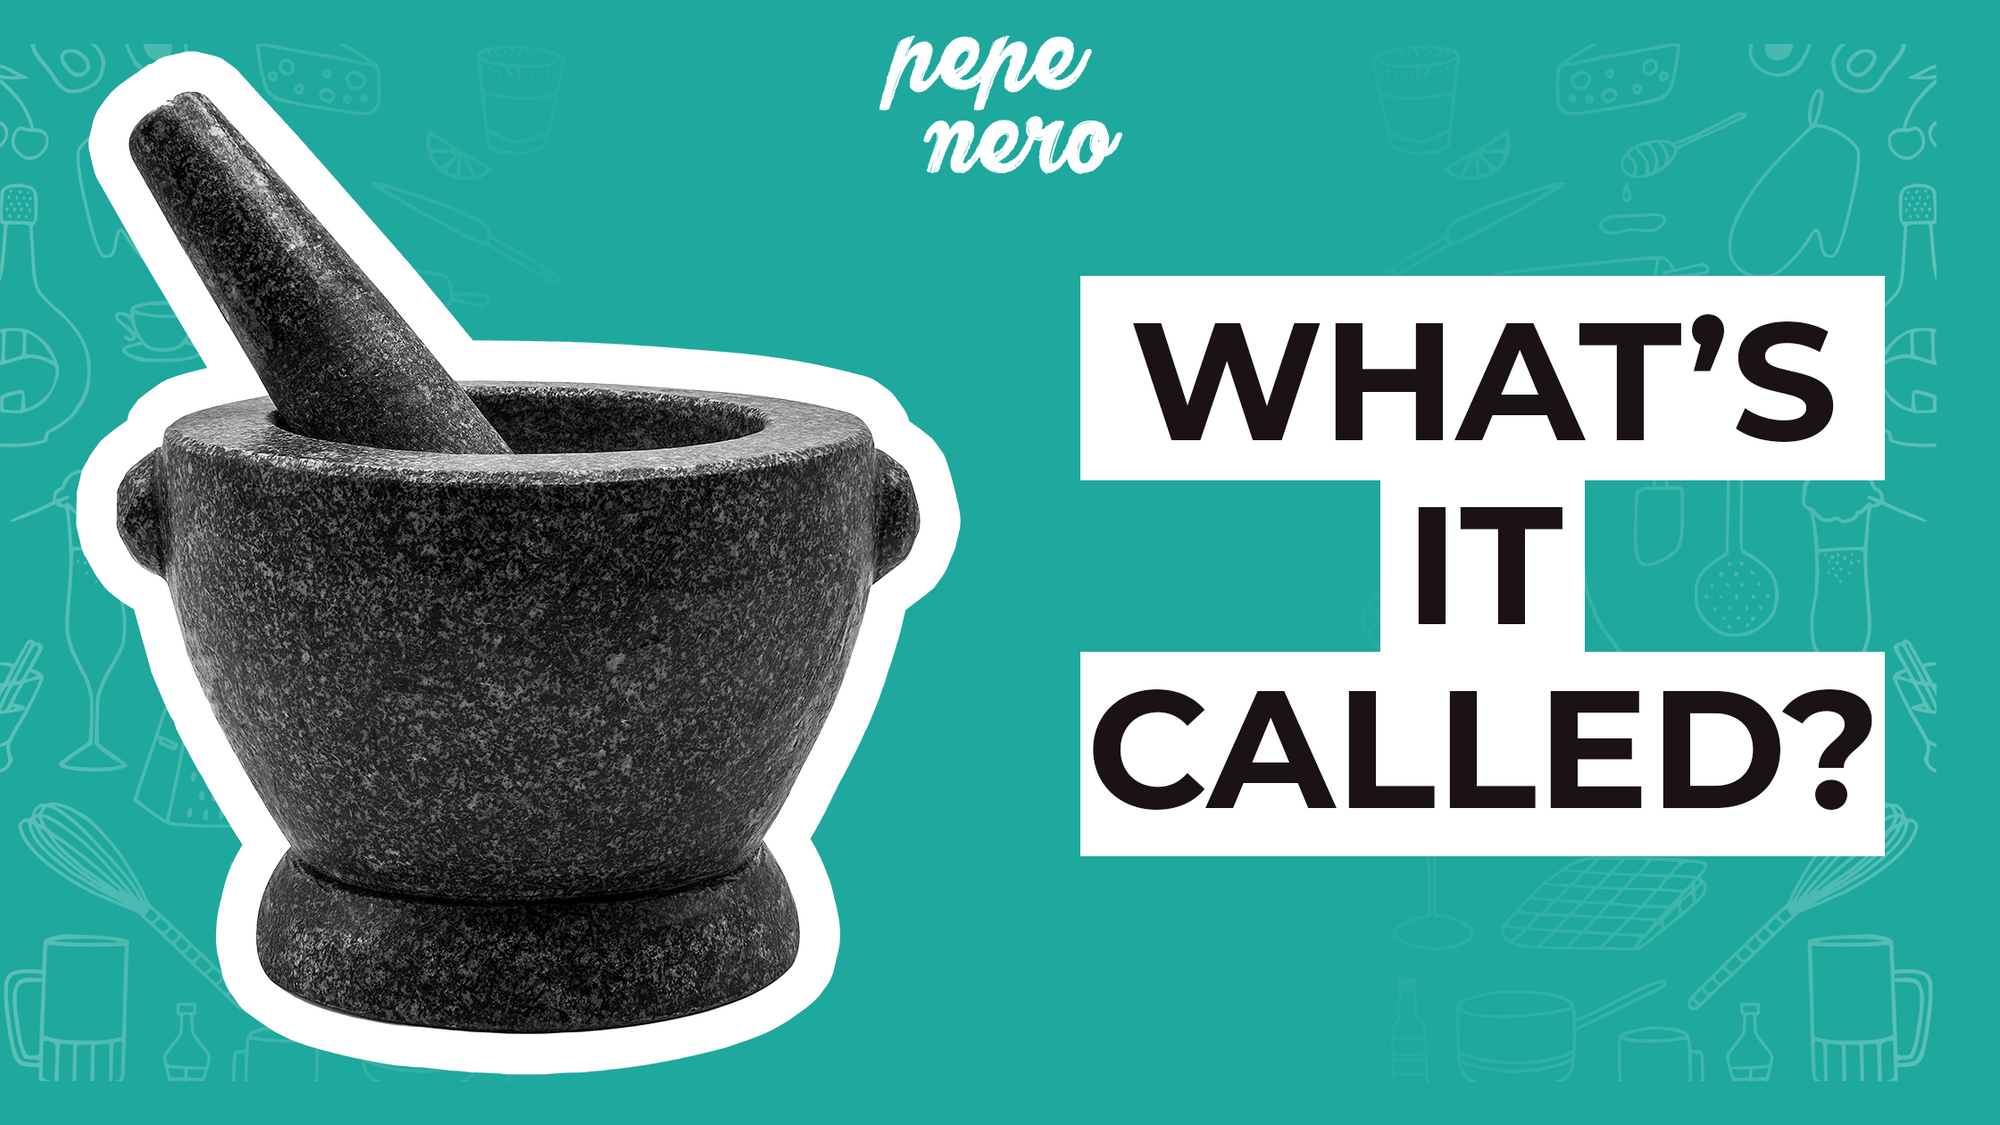 What Is the Bowl Called in a Mortar and Pestle?